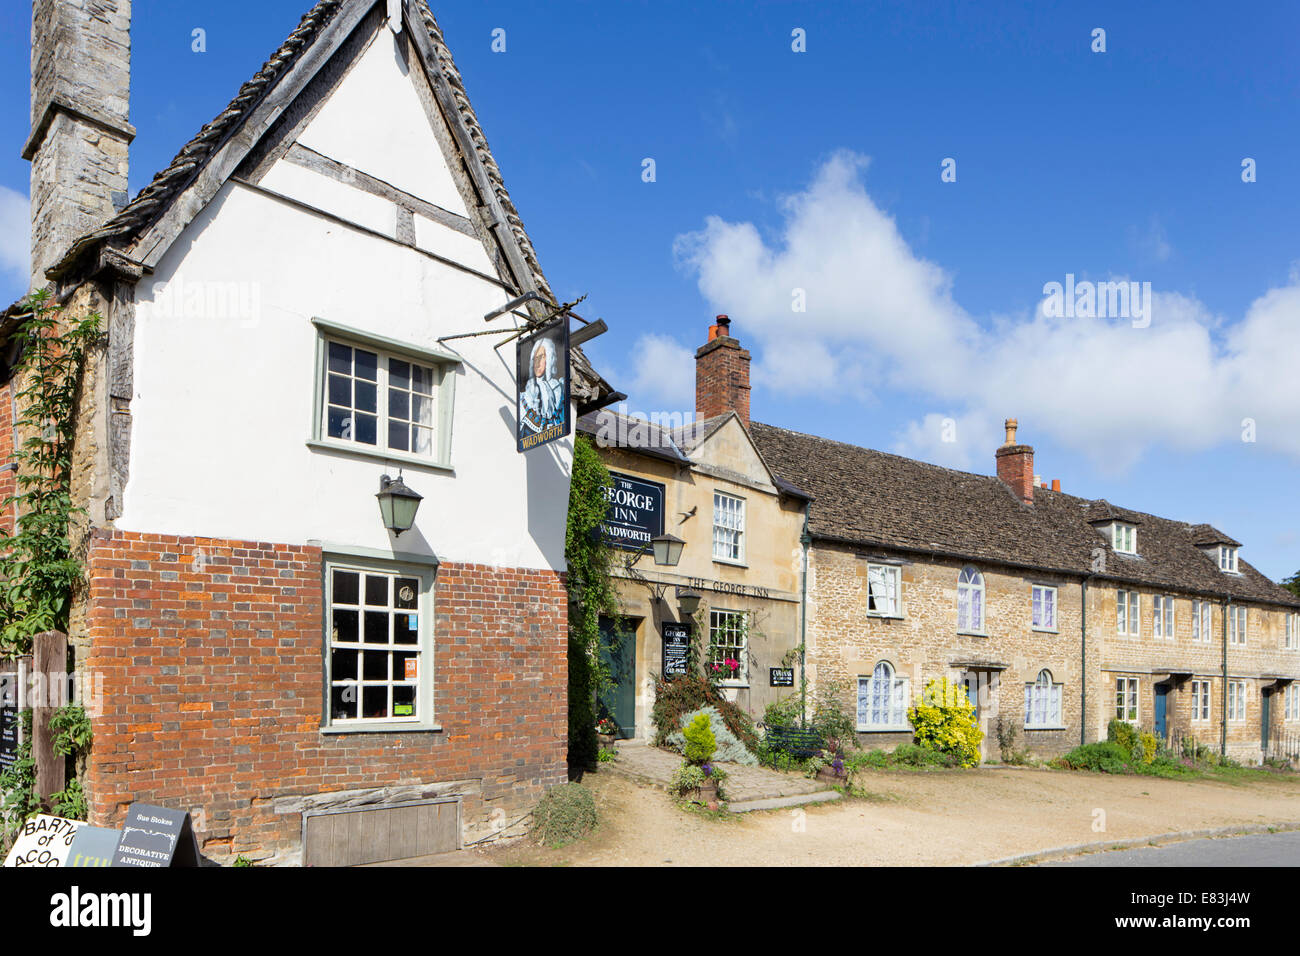 Timber-framed buildings, Lacock, Wiltshire, England, UK Stock Photo